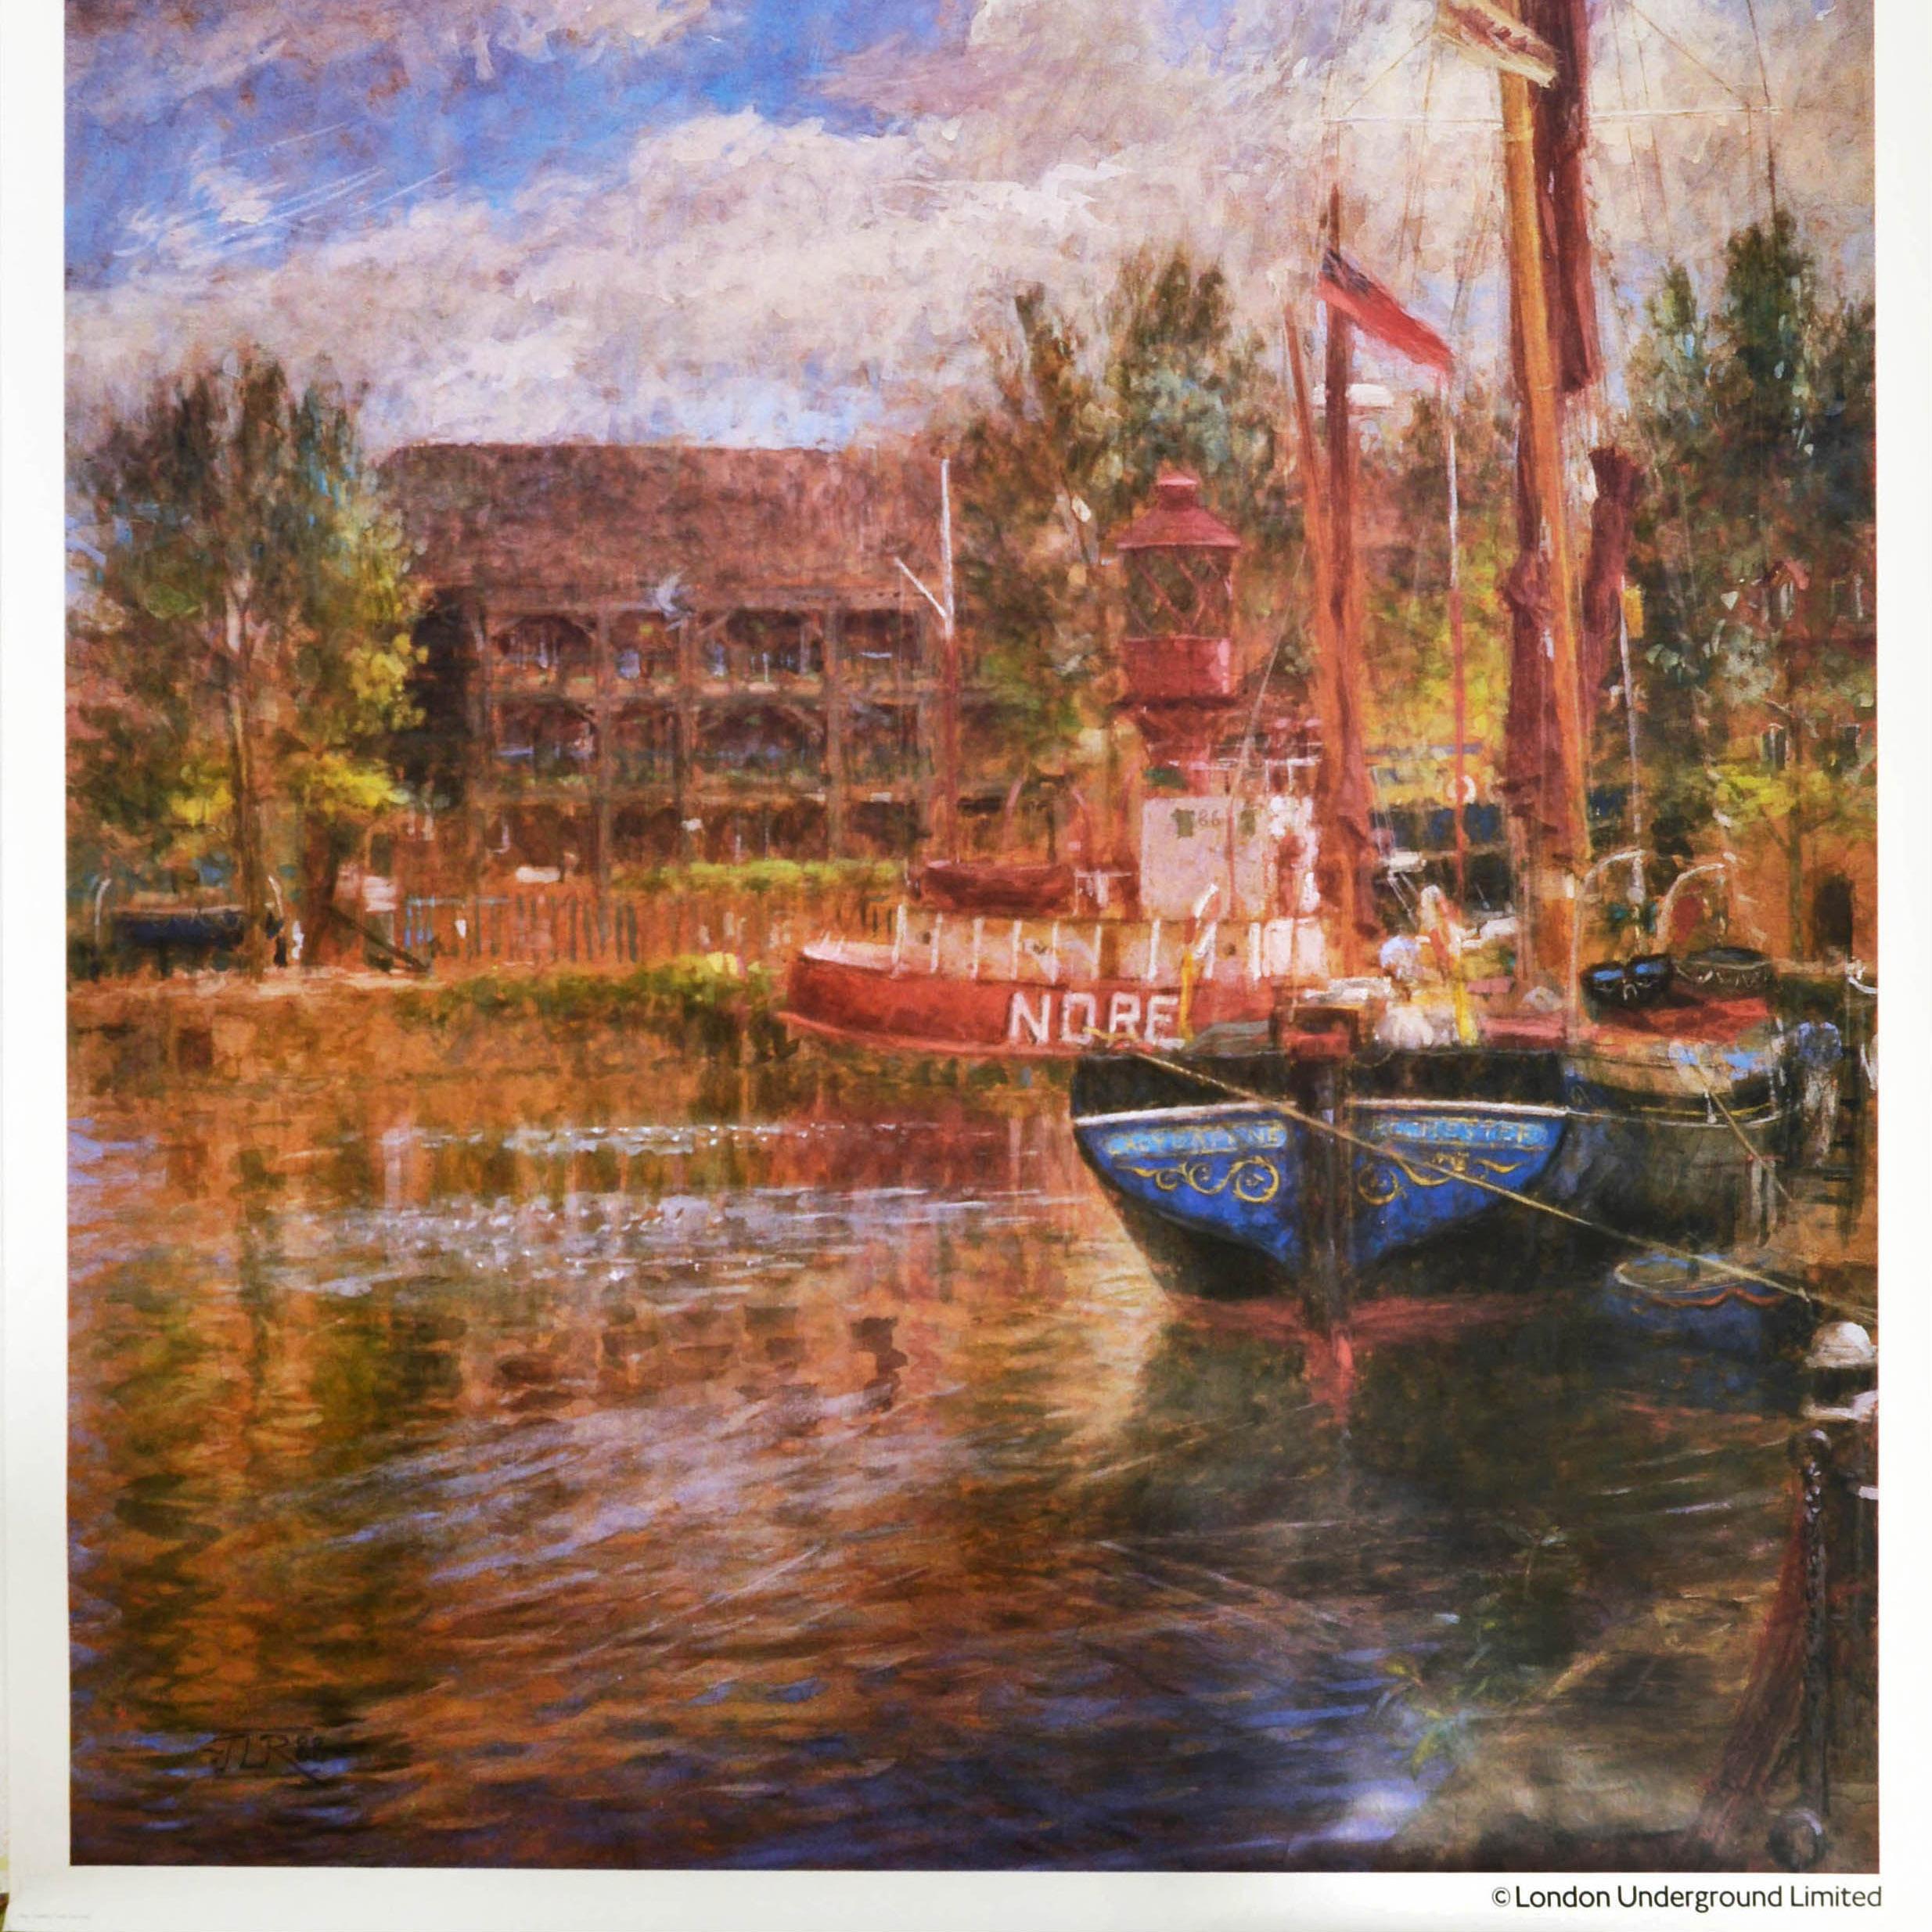 Original vintage London Underground poster - St. Katharine's Dock by Tube nearest station Tower Hill - featuring a ship and a boat moored on the water with trees and a building below the cloudy blue sky viewed from the dockside. St Katharine's Dock